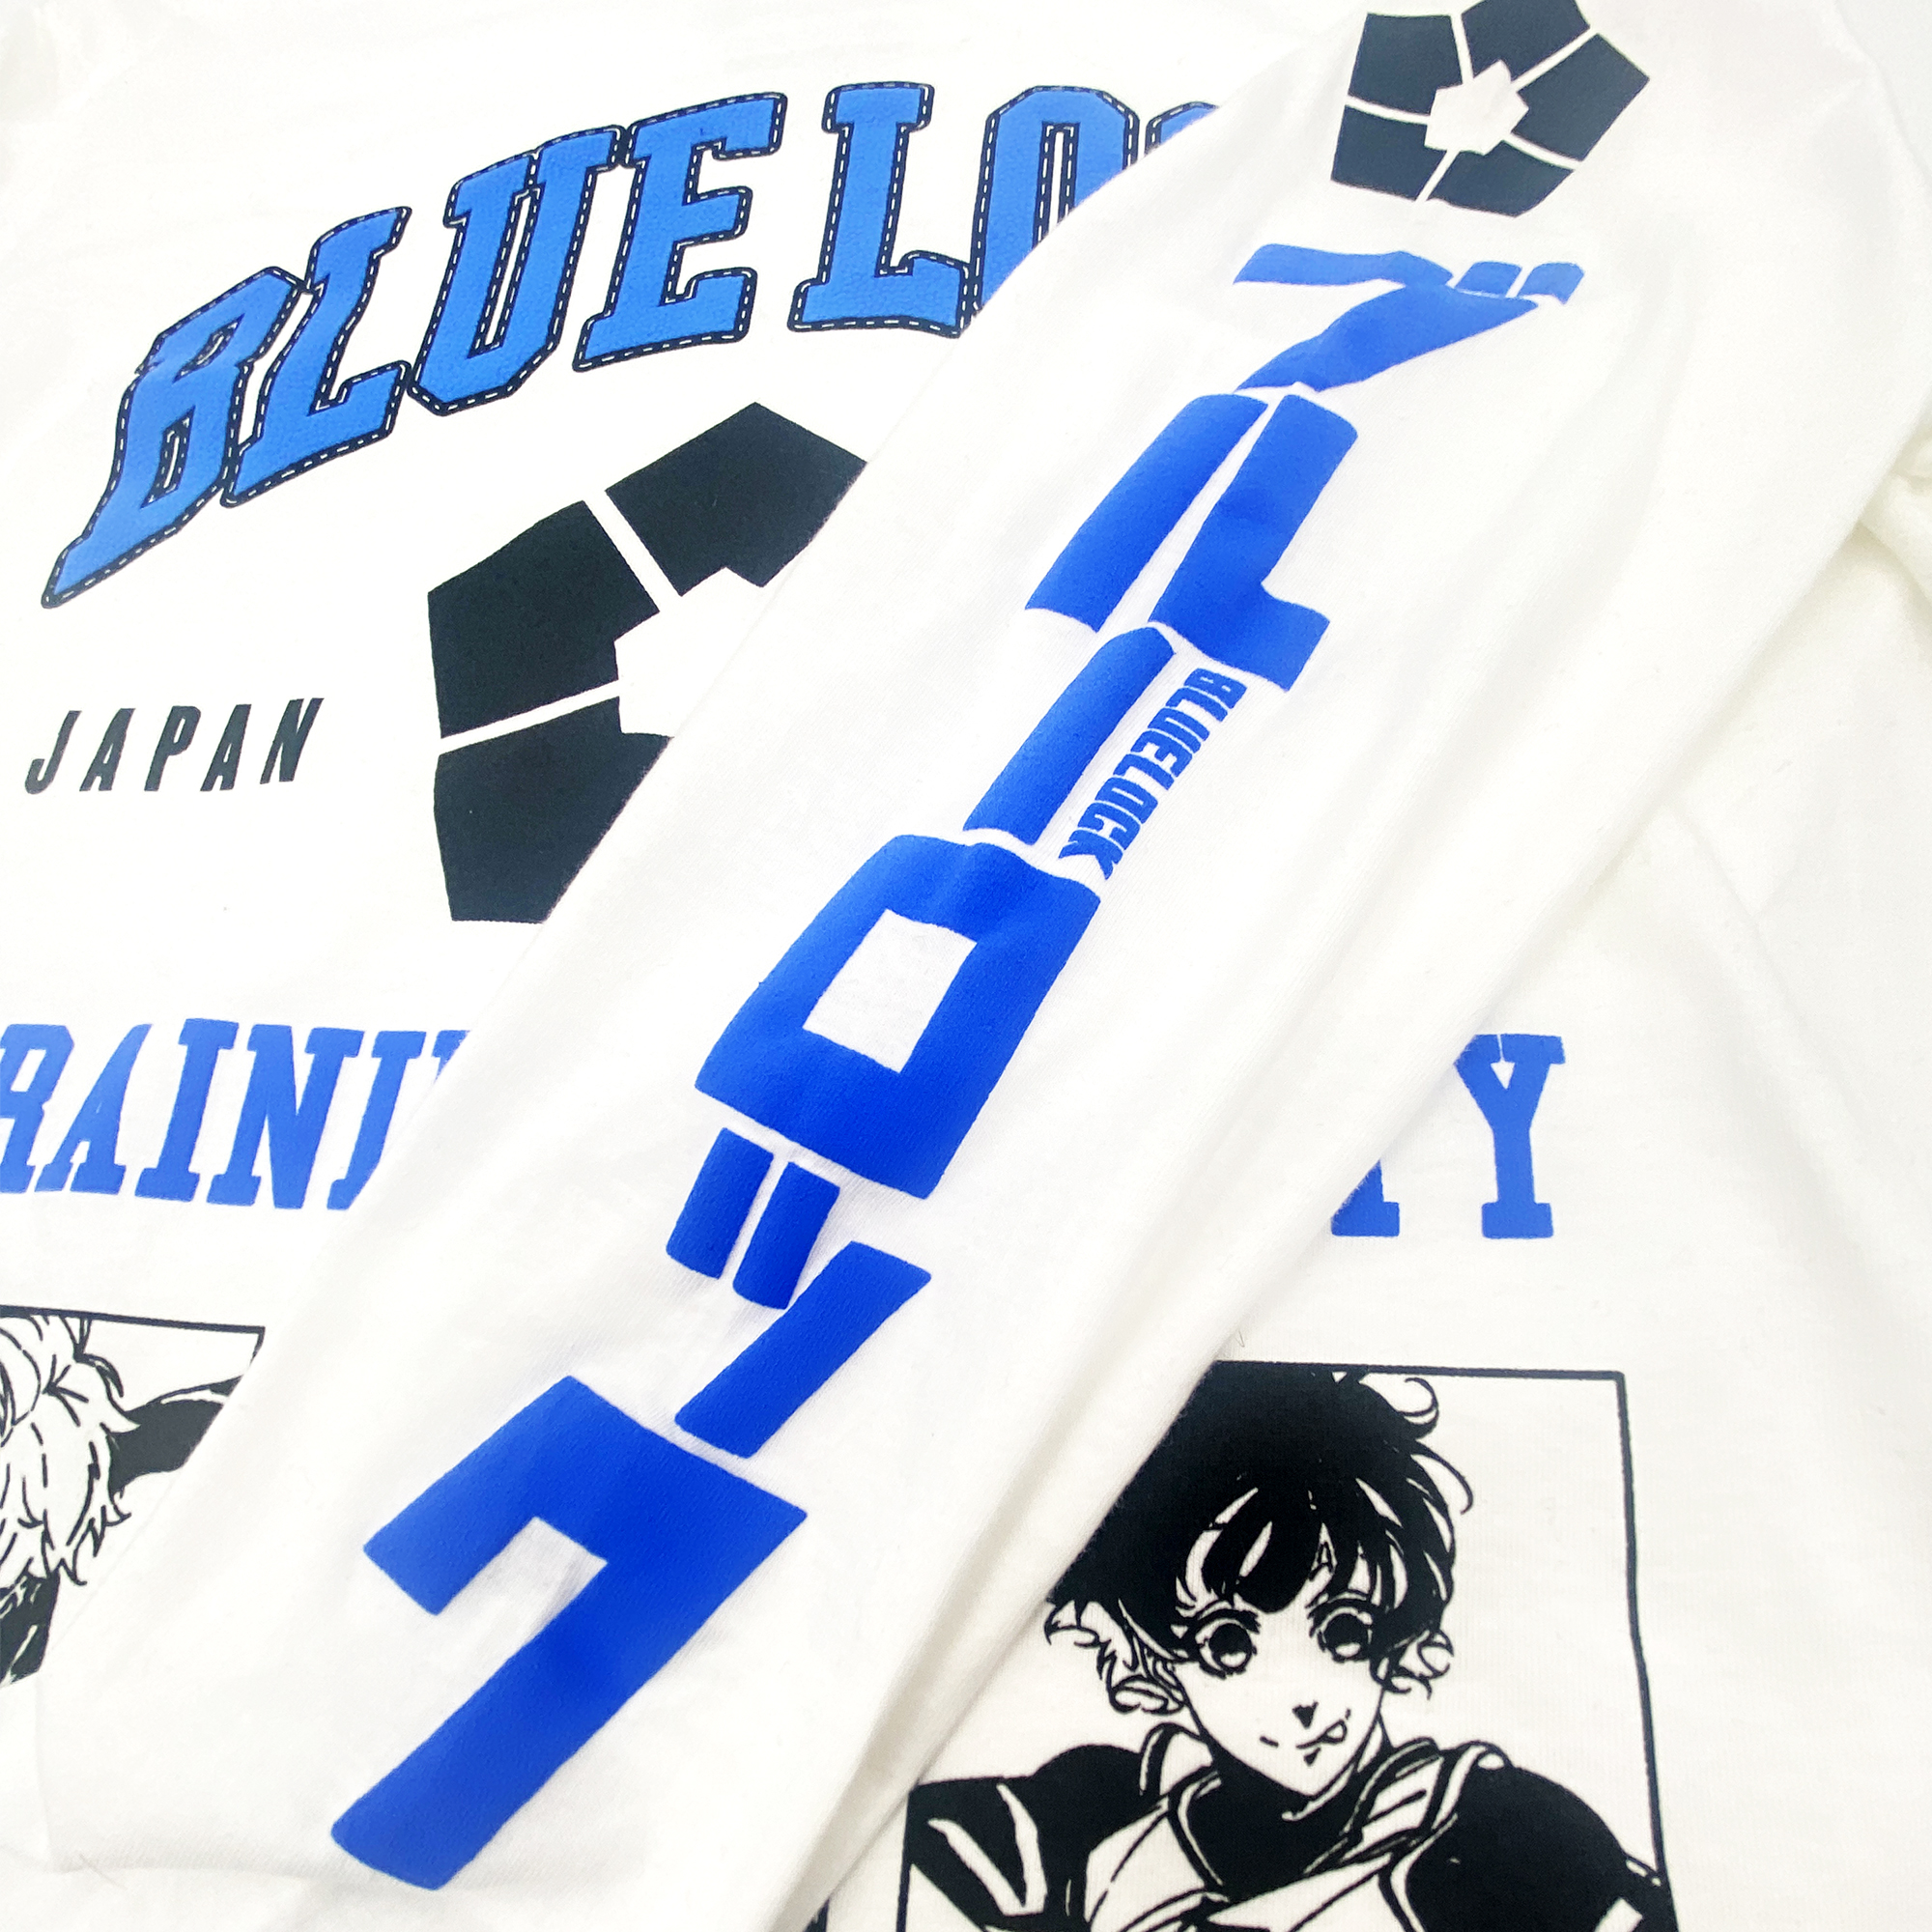 BLUELOCK - BLUELOCK Facility Long Sleeve - Crunchyroll Exclusive! image count 2